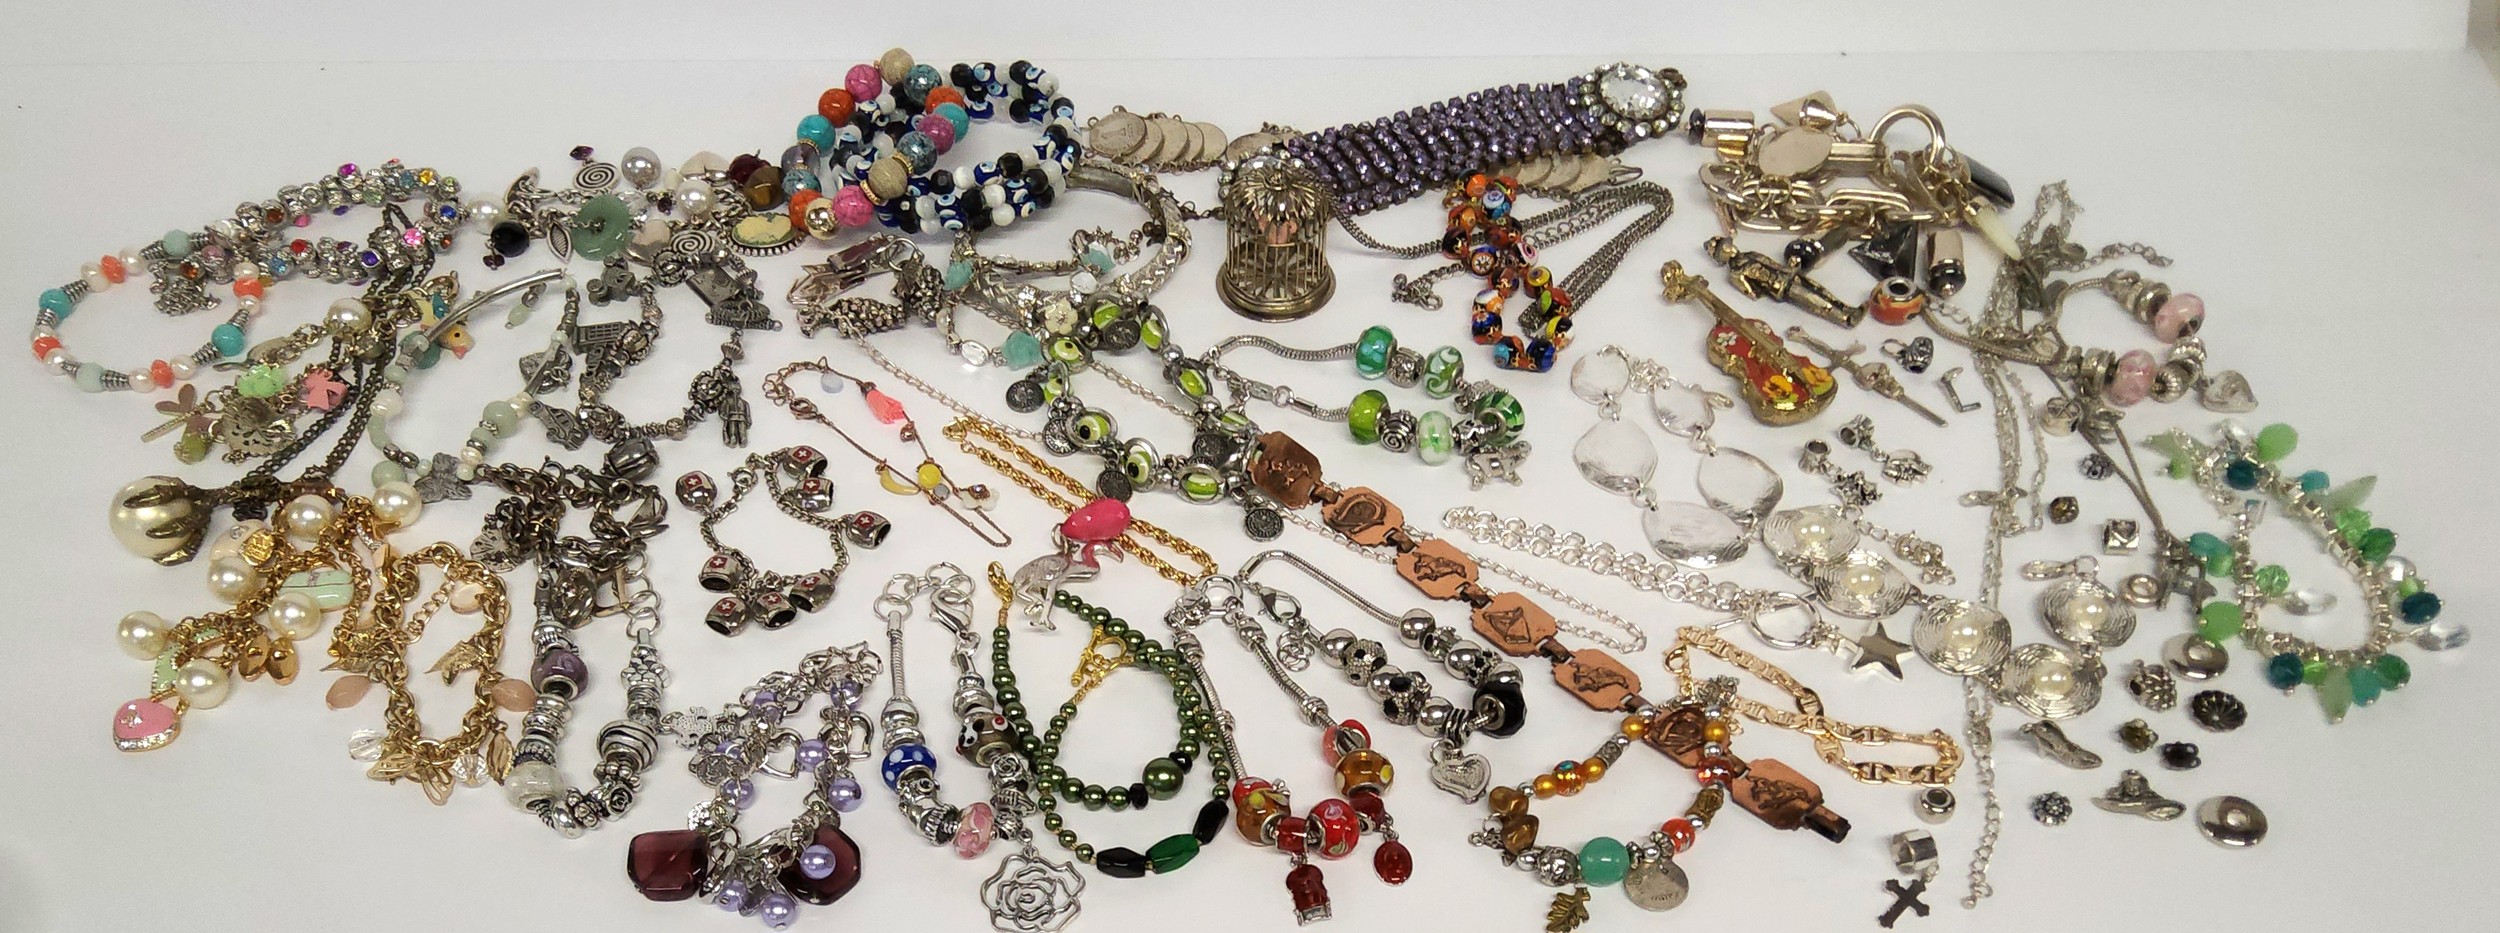 Costume jewellery including various charm bracelets, some Pandora style; necklaces including a